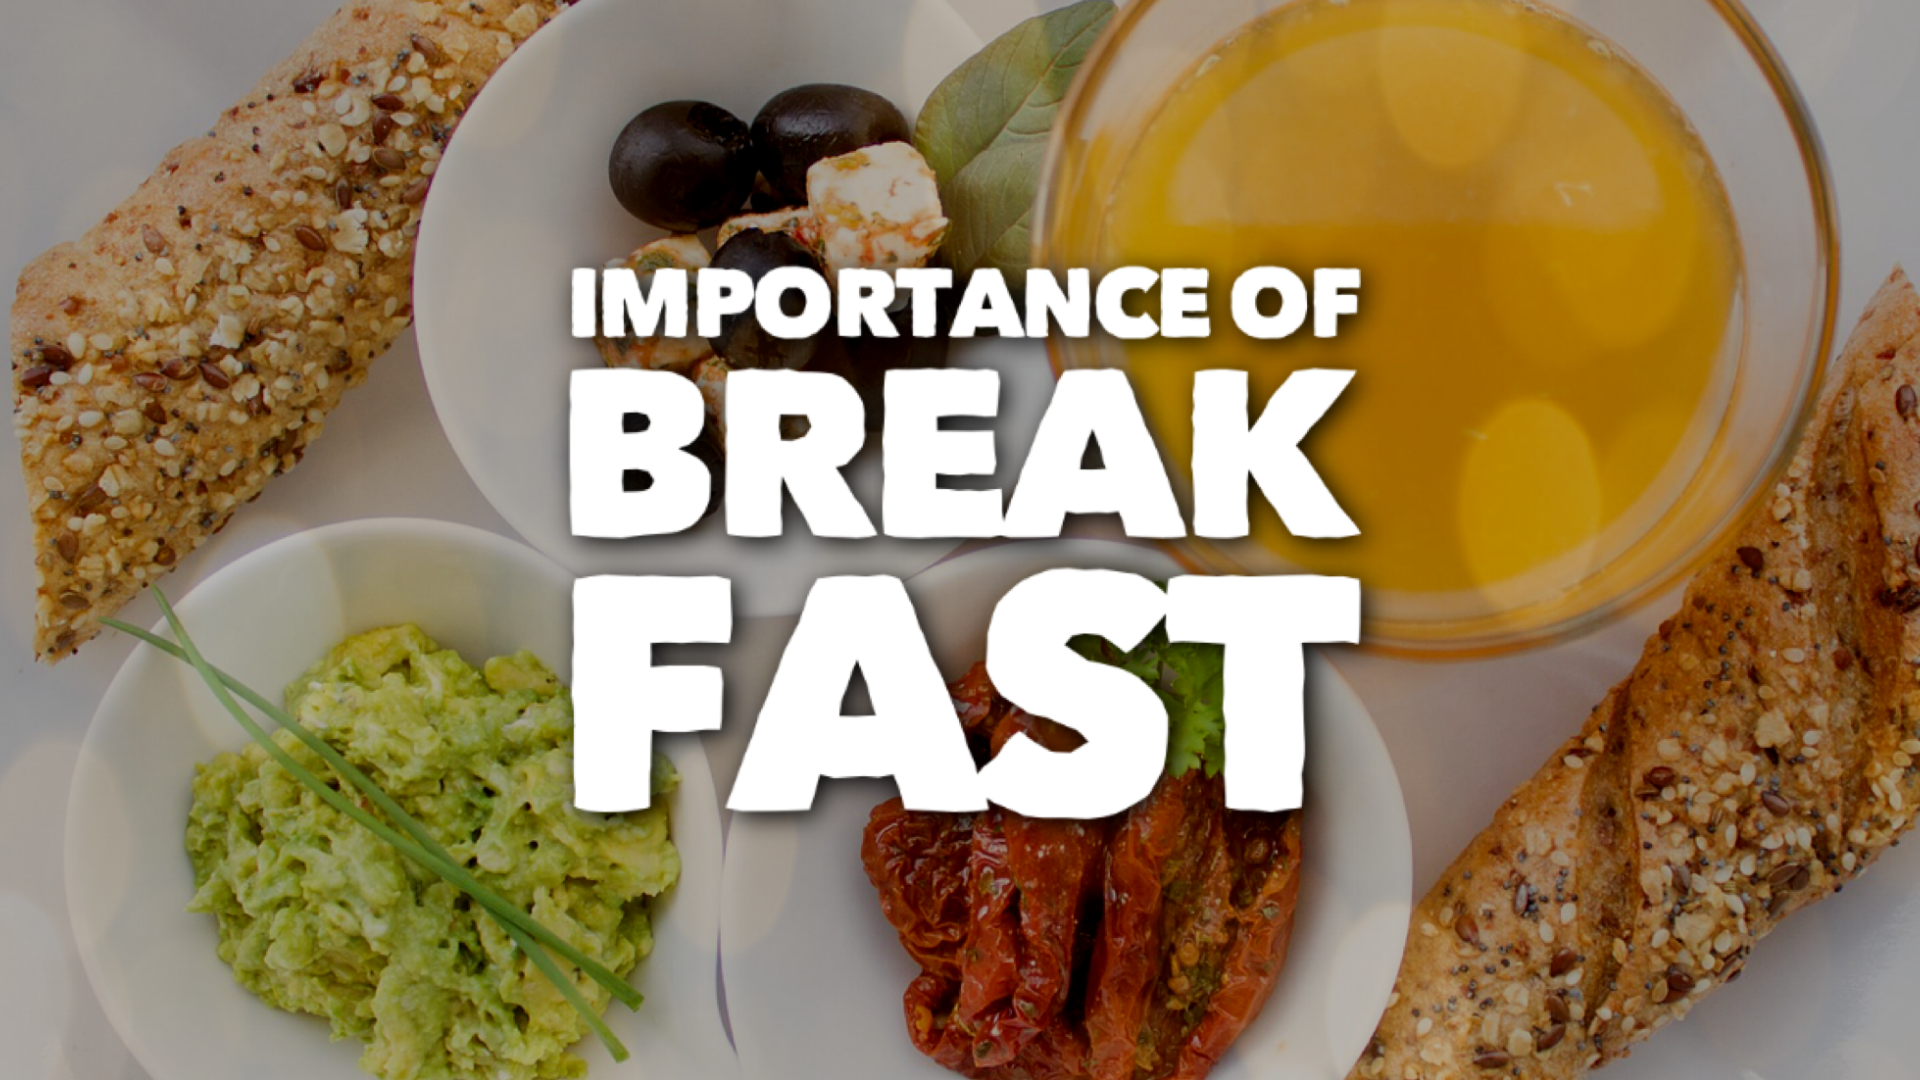 Many studies do show benefits to eating a healthy breakfast but it's unclear if that's because the people in these studies are generally healthier.